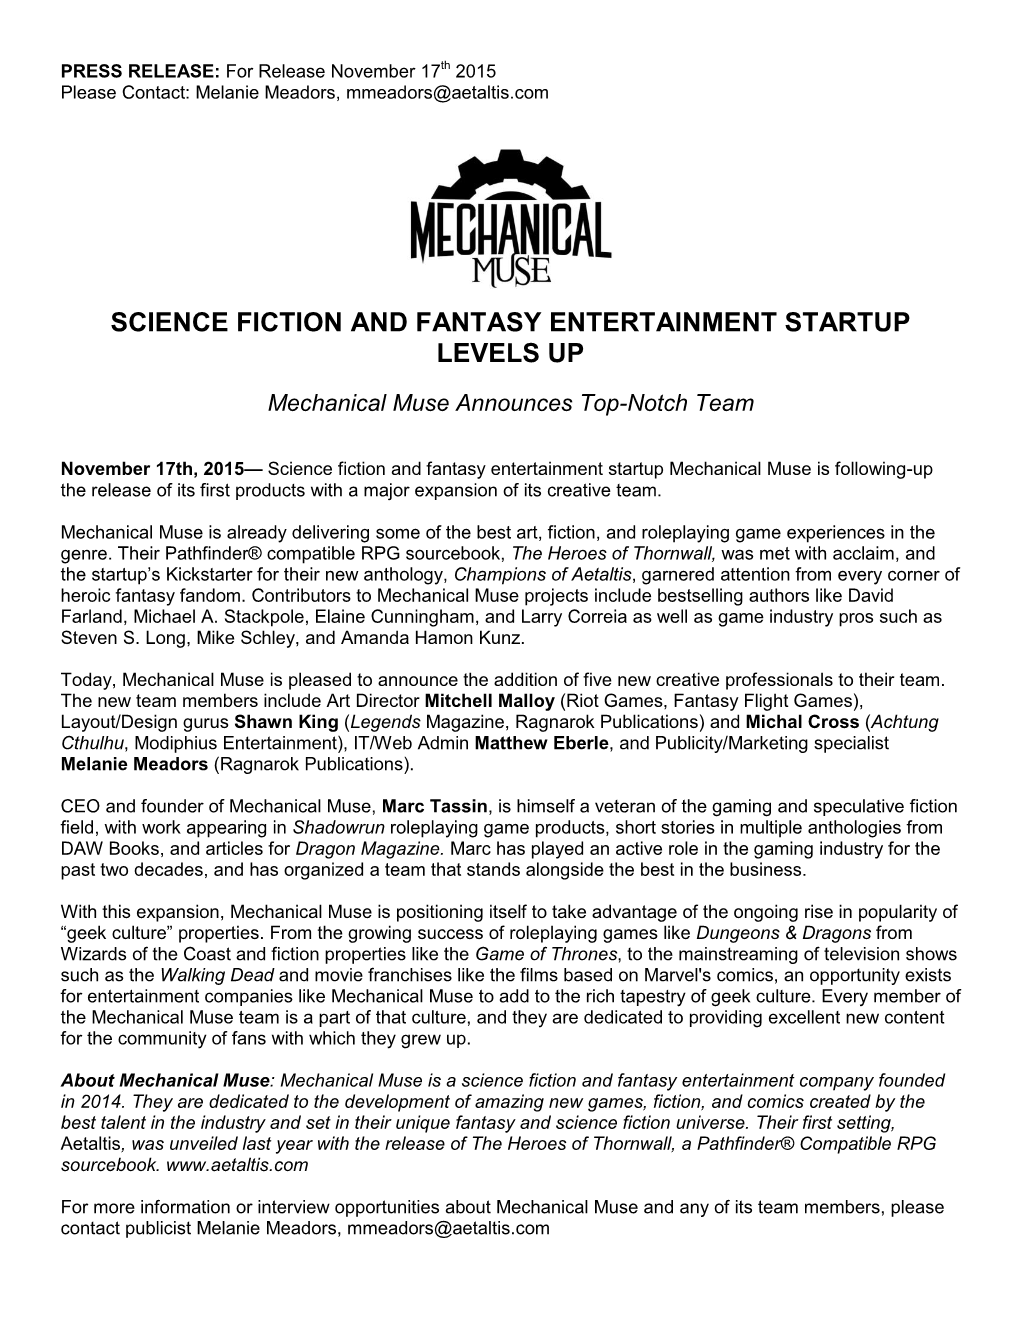 Science Fiction and Fantasy Entertainment Startup Levels Up